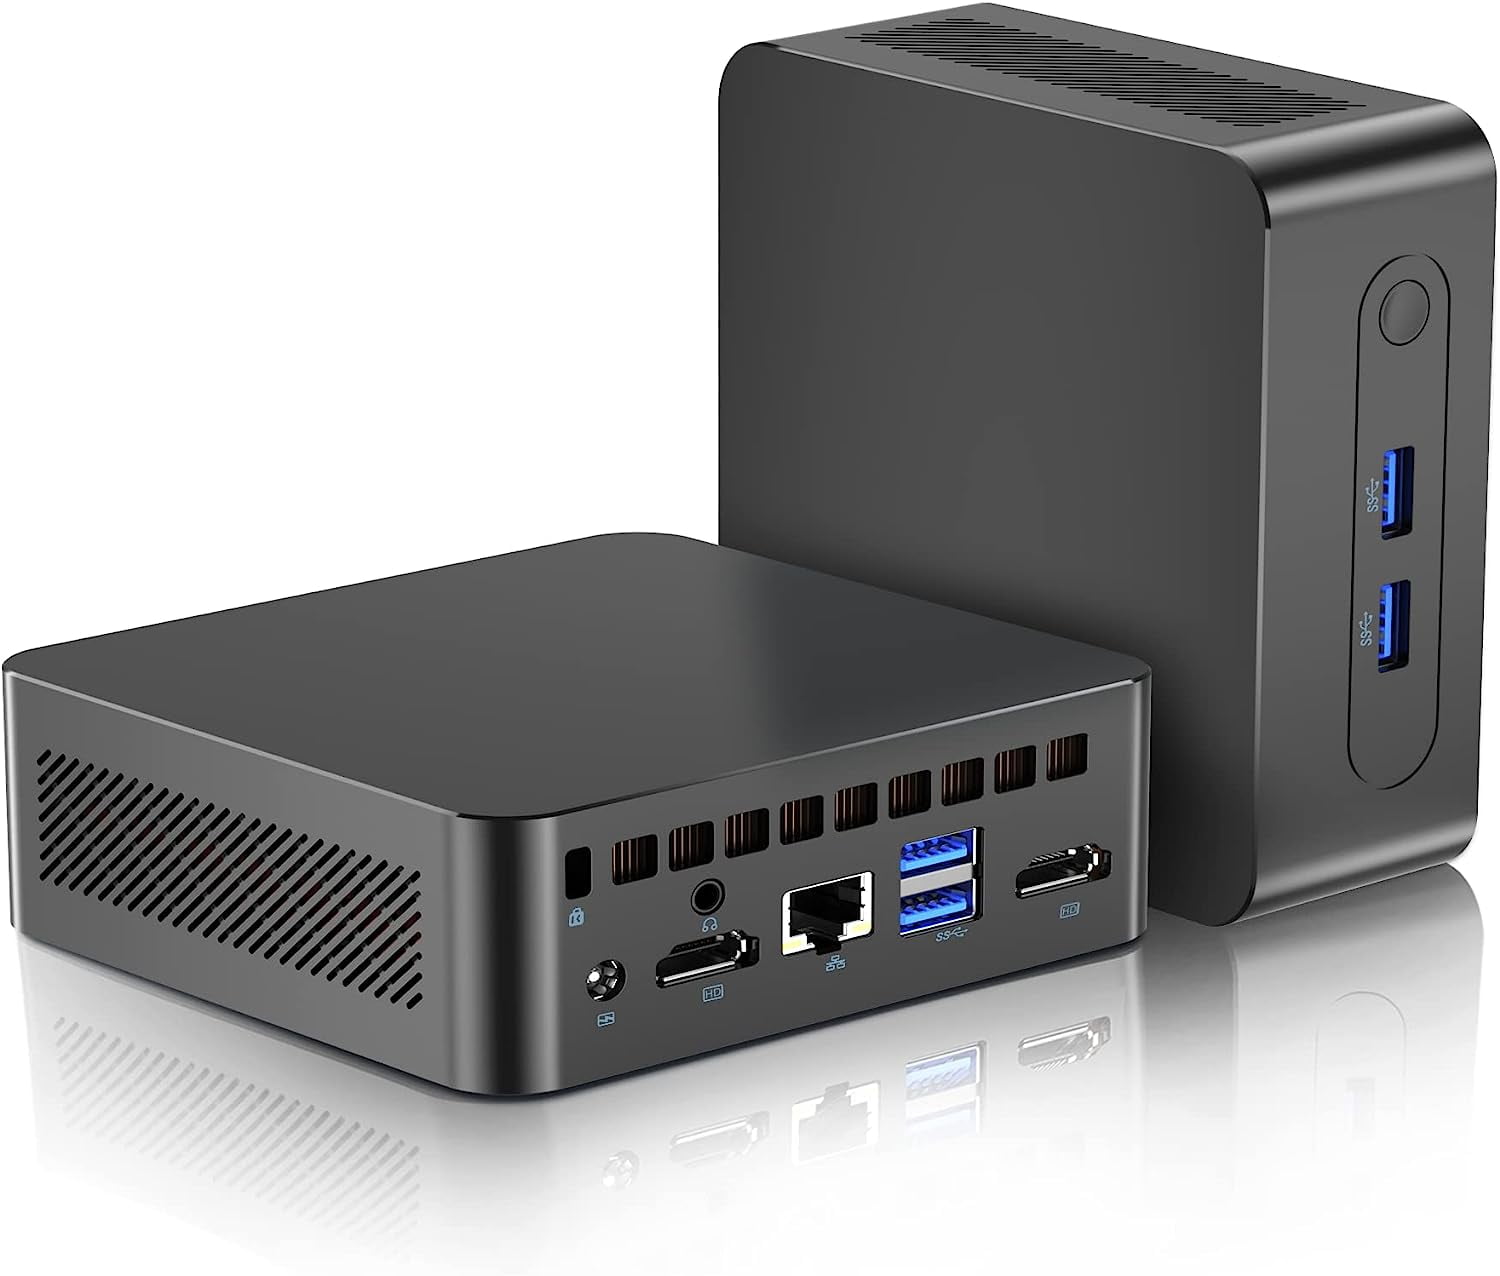 Product Review: N100 Mini PC – A Powerful and Silent Streaming